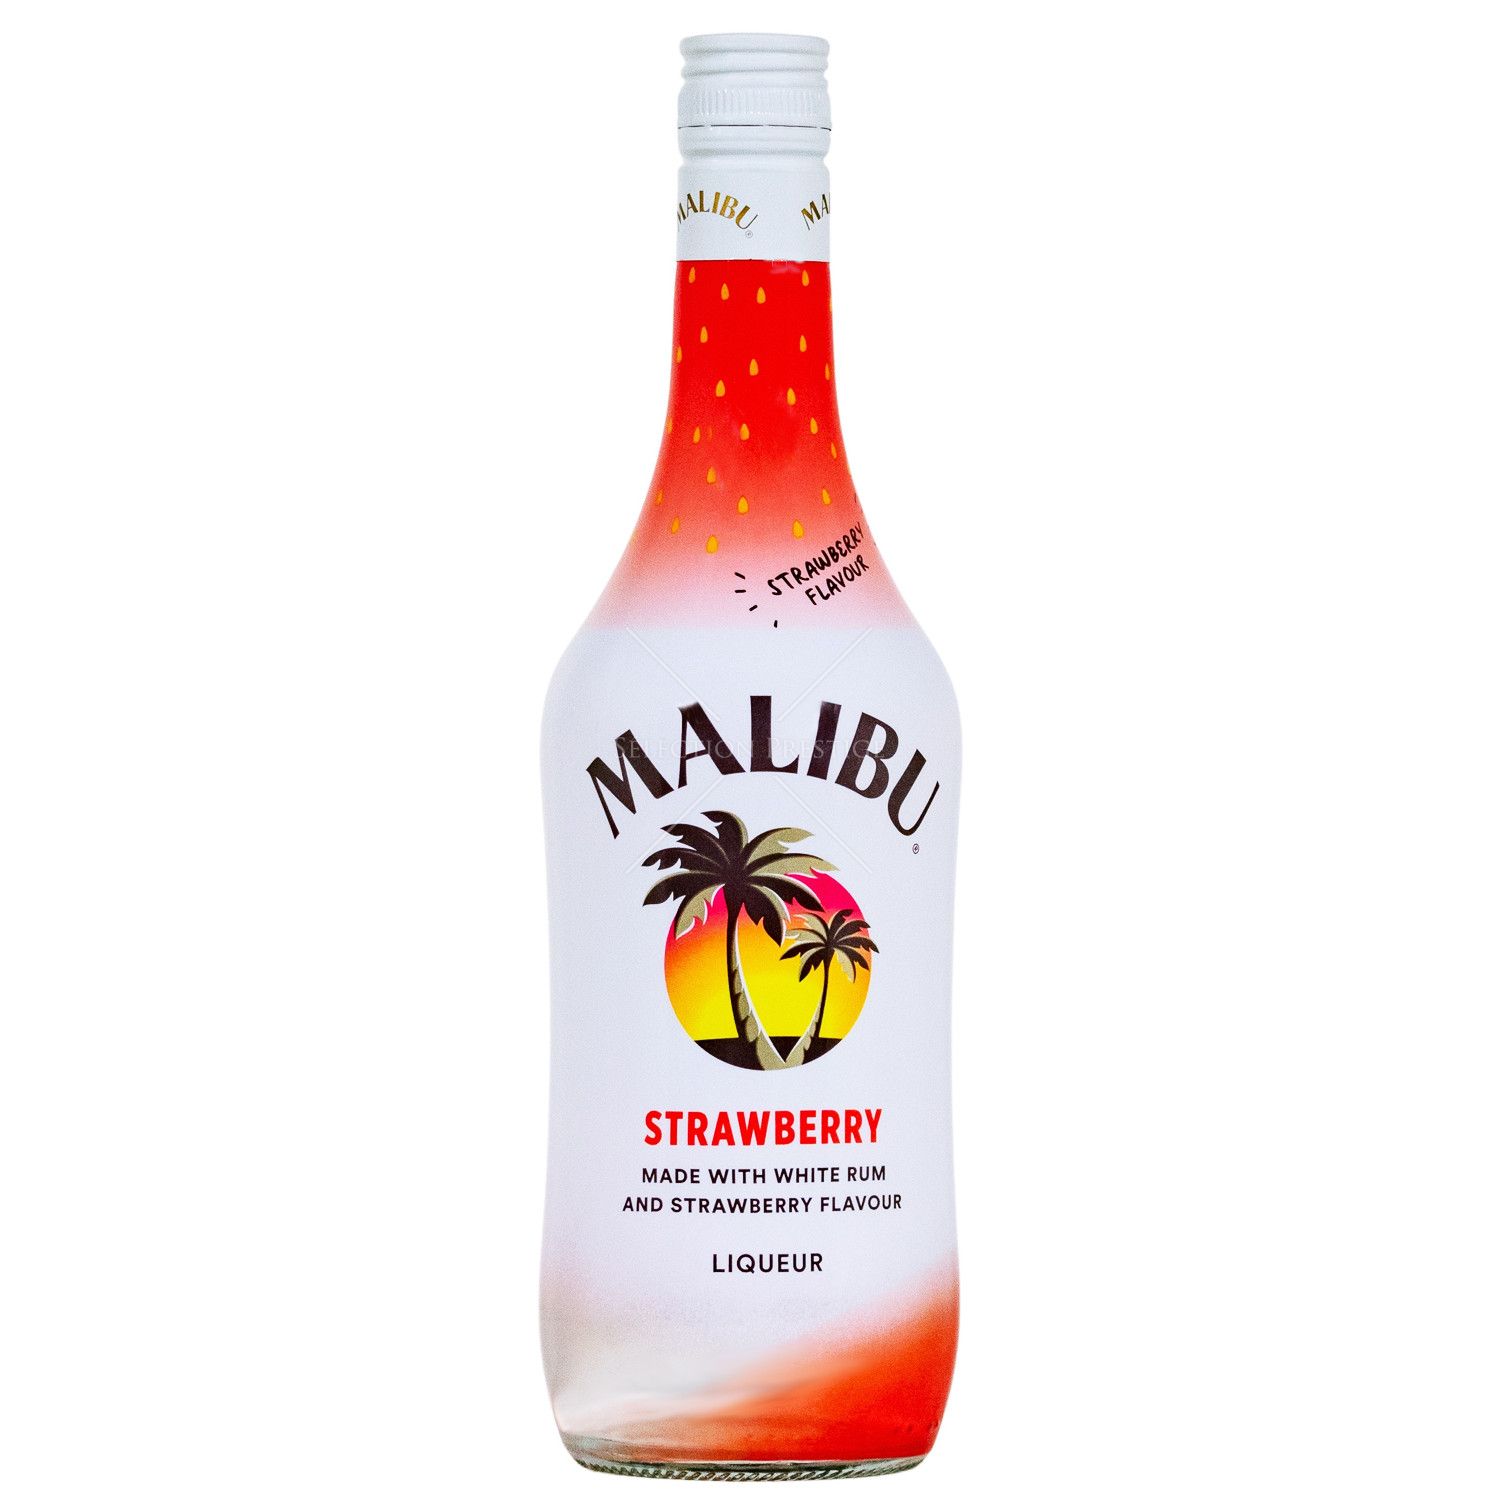 Introducing the refreshing taste of summer with Malibu Strawberry